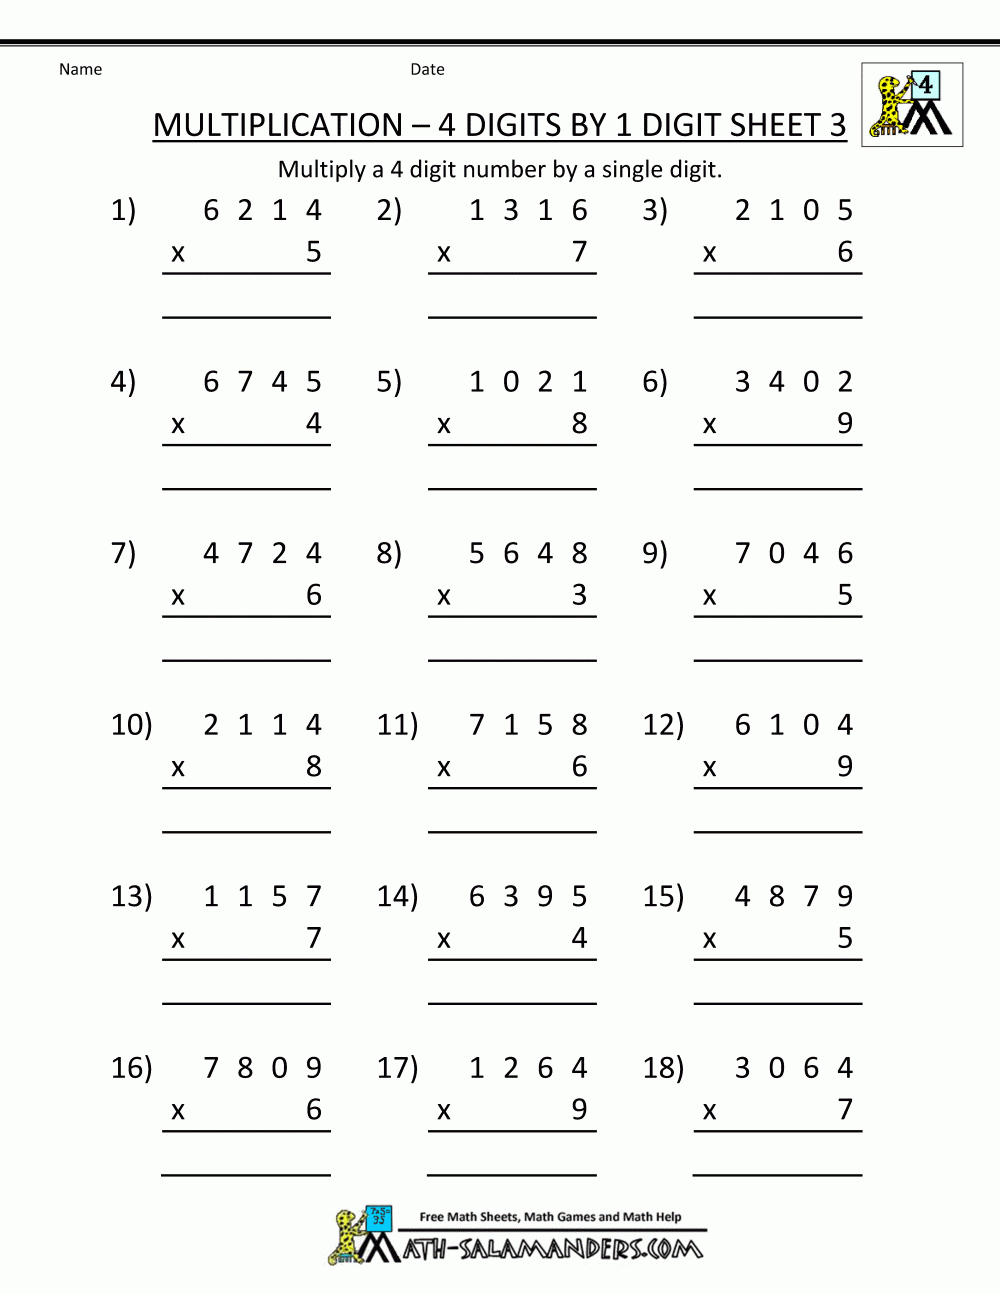 Multiplication Practice Sheets For 3Rd Grade - Google Search within Worksheets Multiplication 3Rd Grade